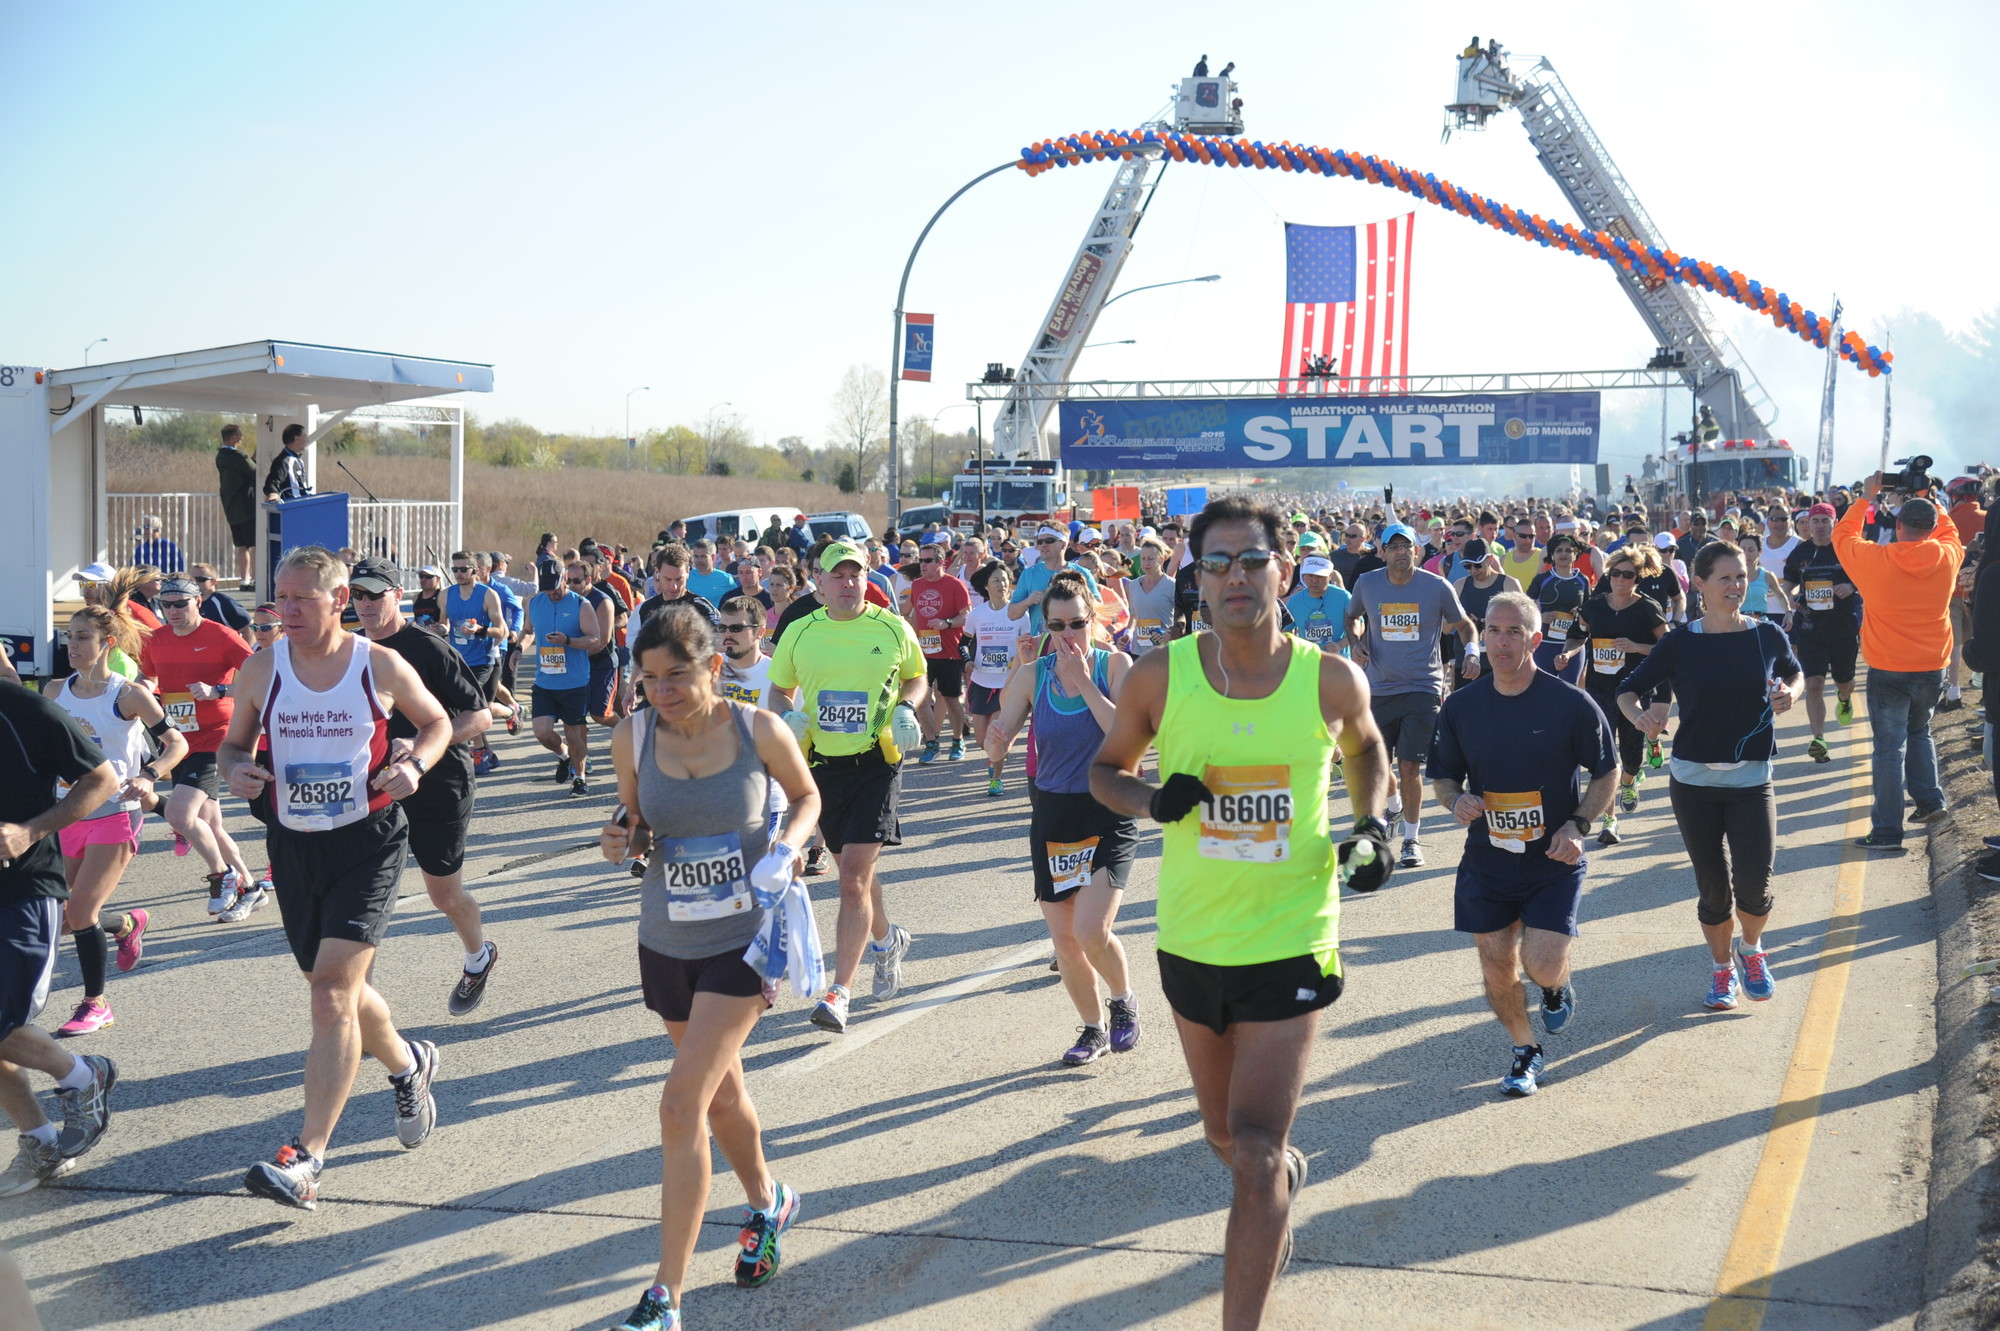 More than 3,500 people ran in the Long Island Marathon on May 3, which included a full 26.2-mile race, and a half marathon.